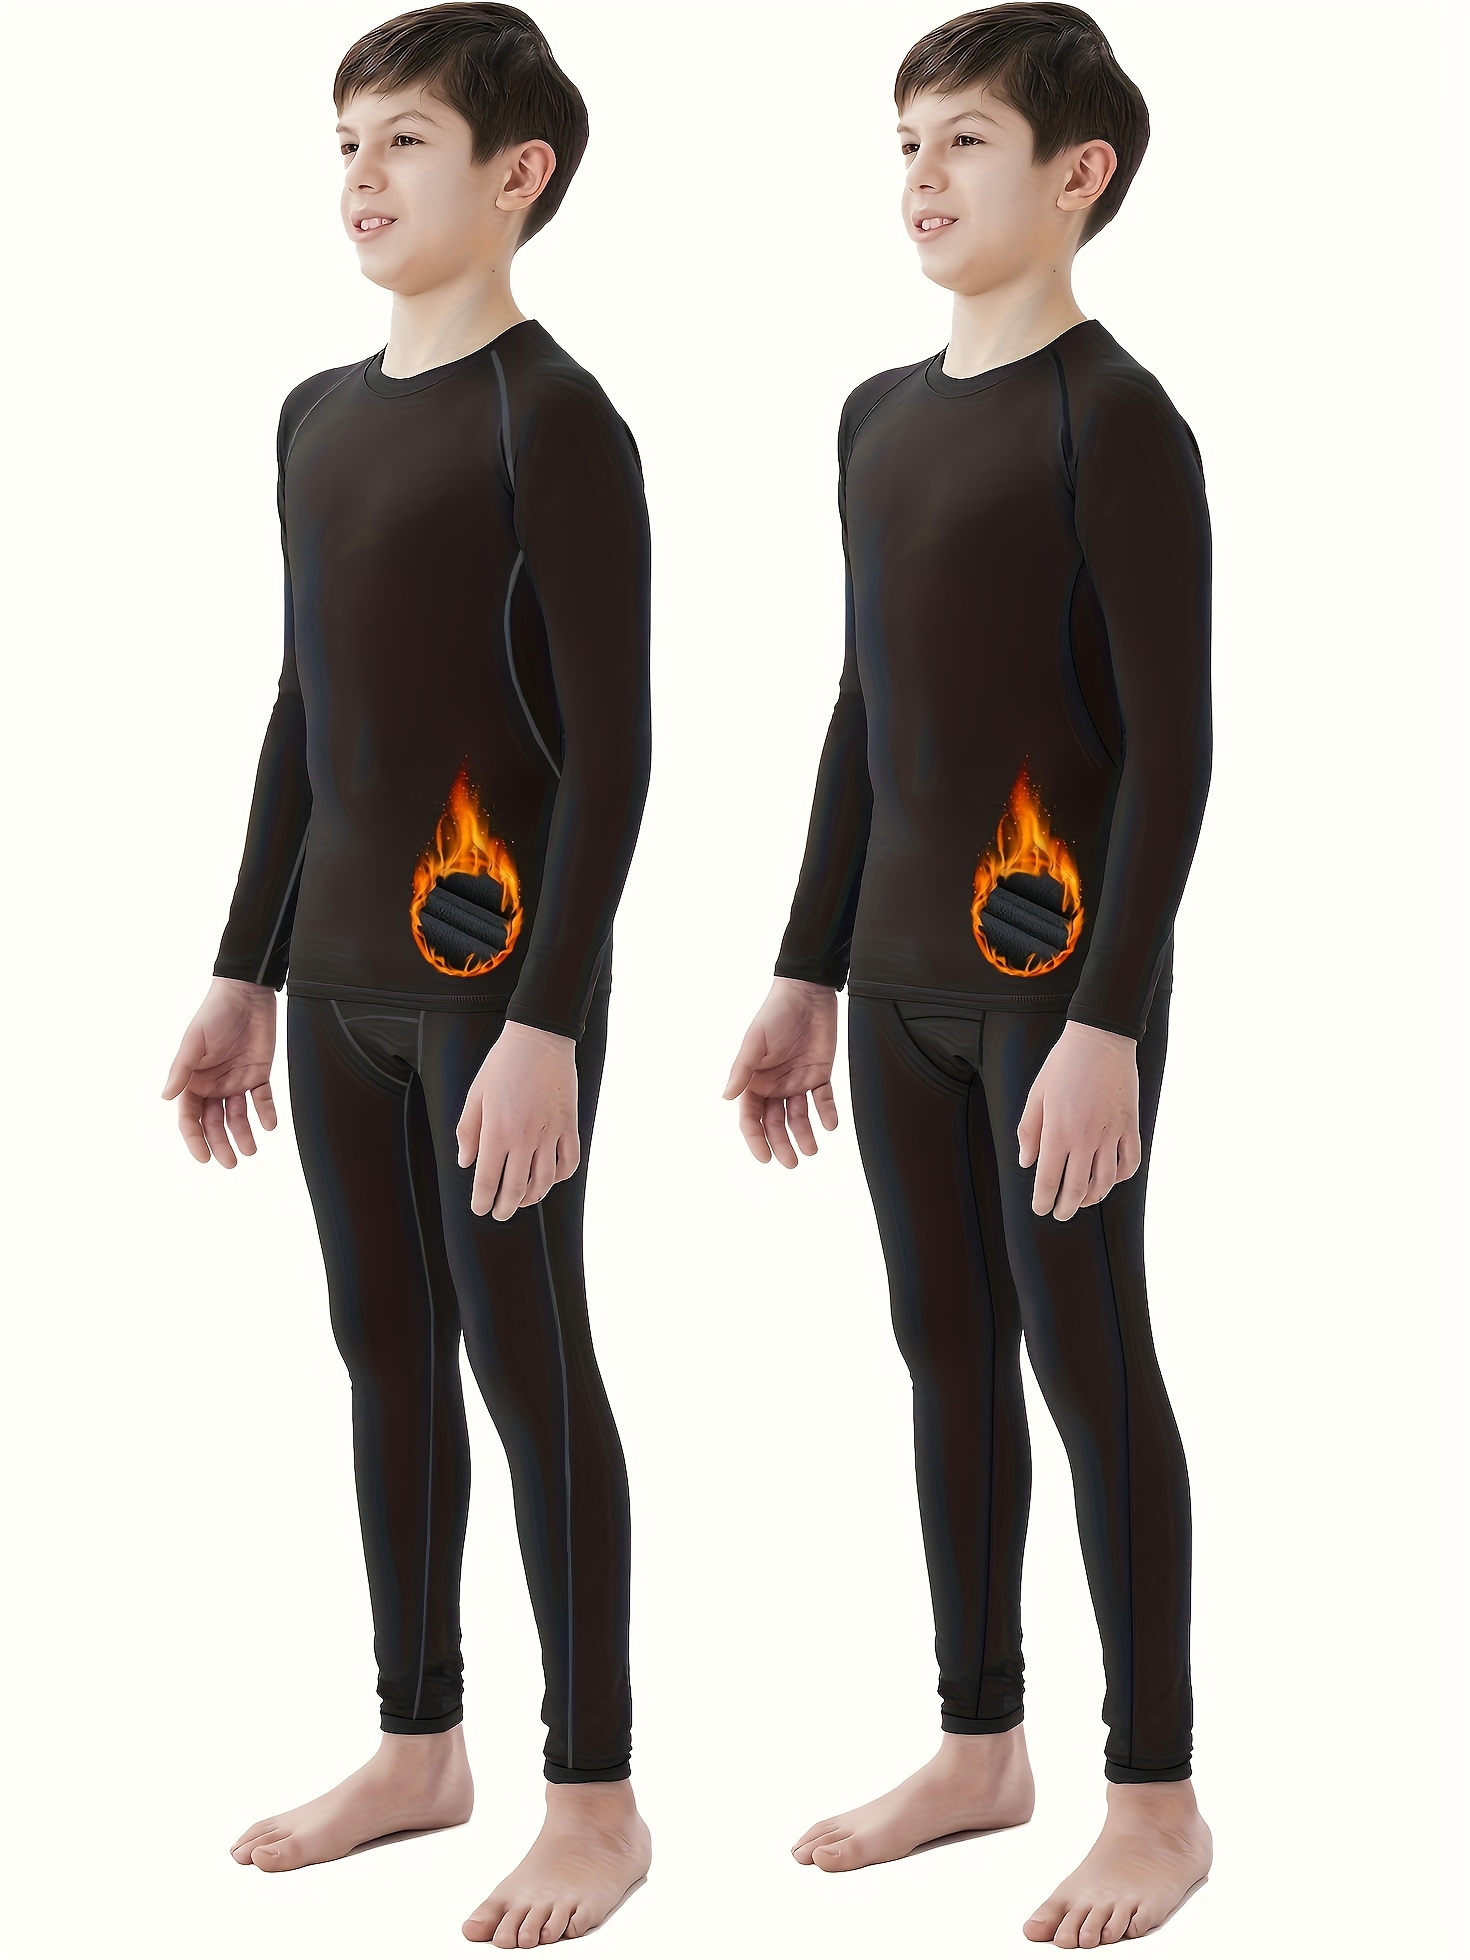 TELALEO Boys Thermal Compression Leggings Pants Youth Fleece Lined